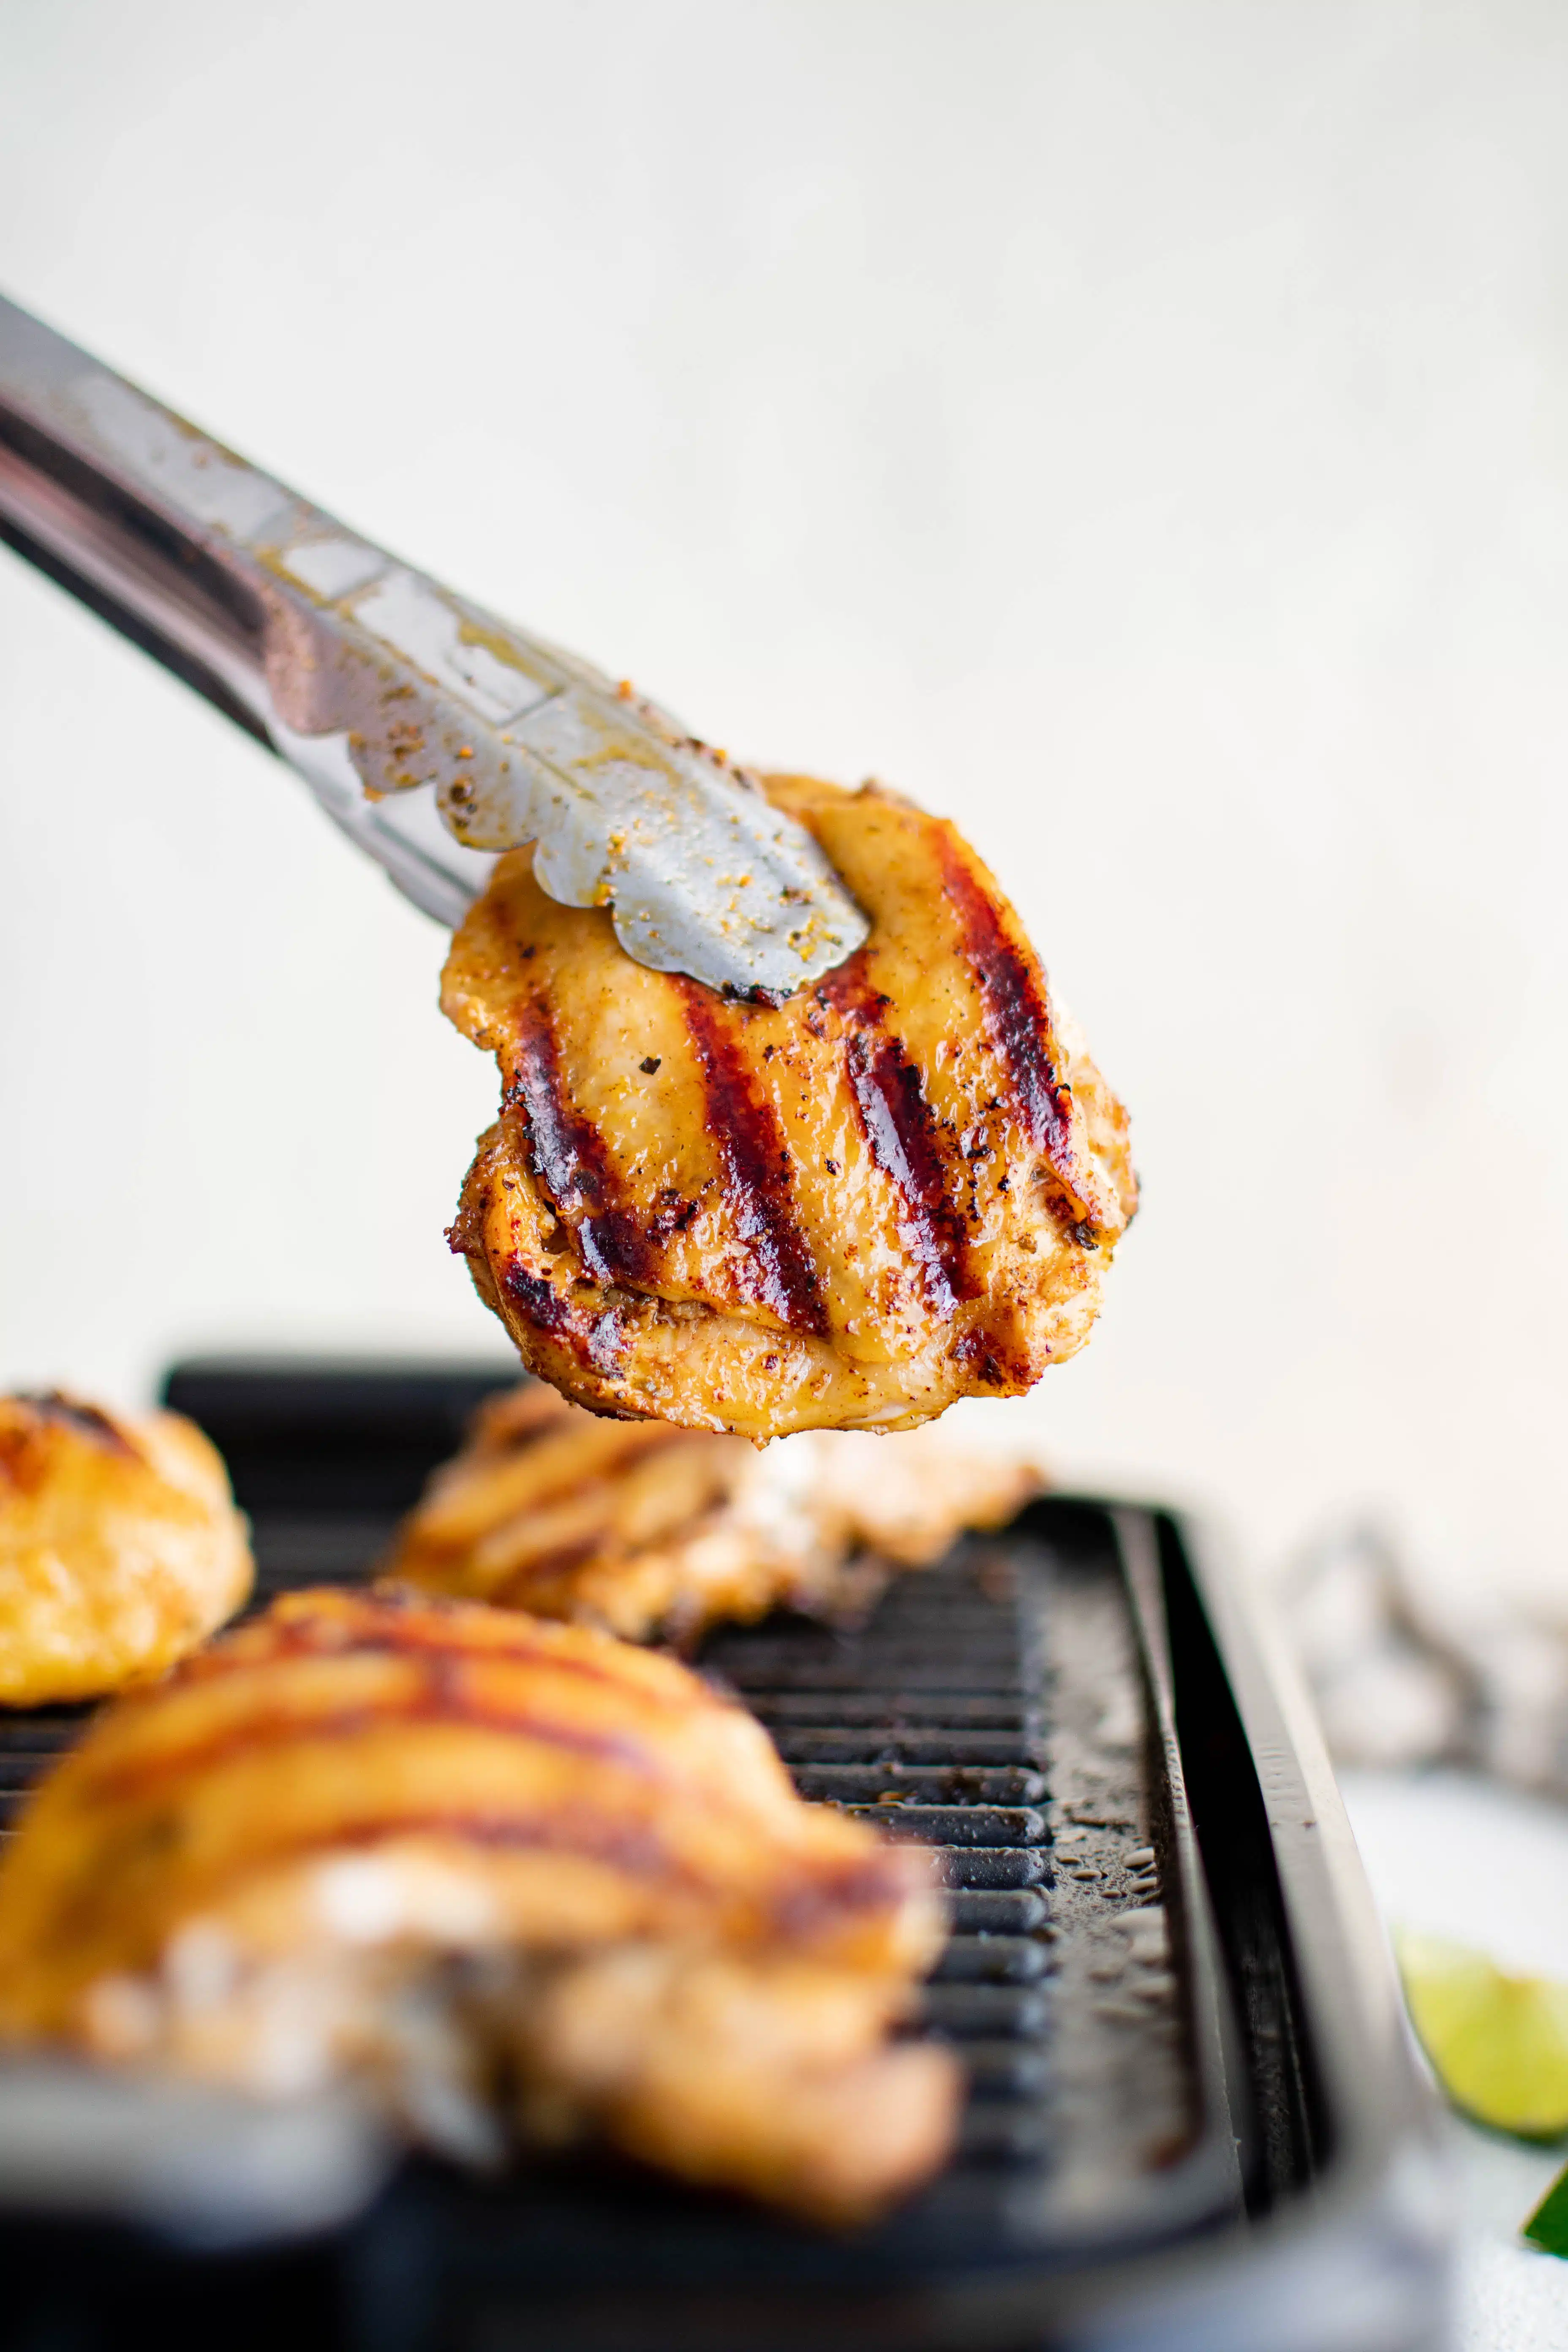 Metal tongs removing grilled pollo asado from an indoor electric grill.